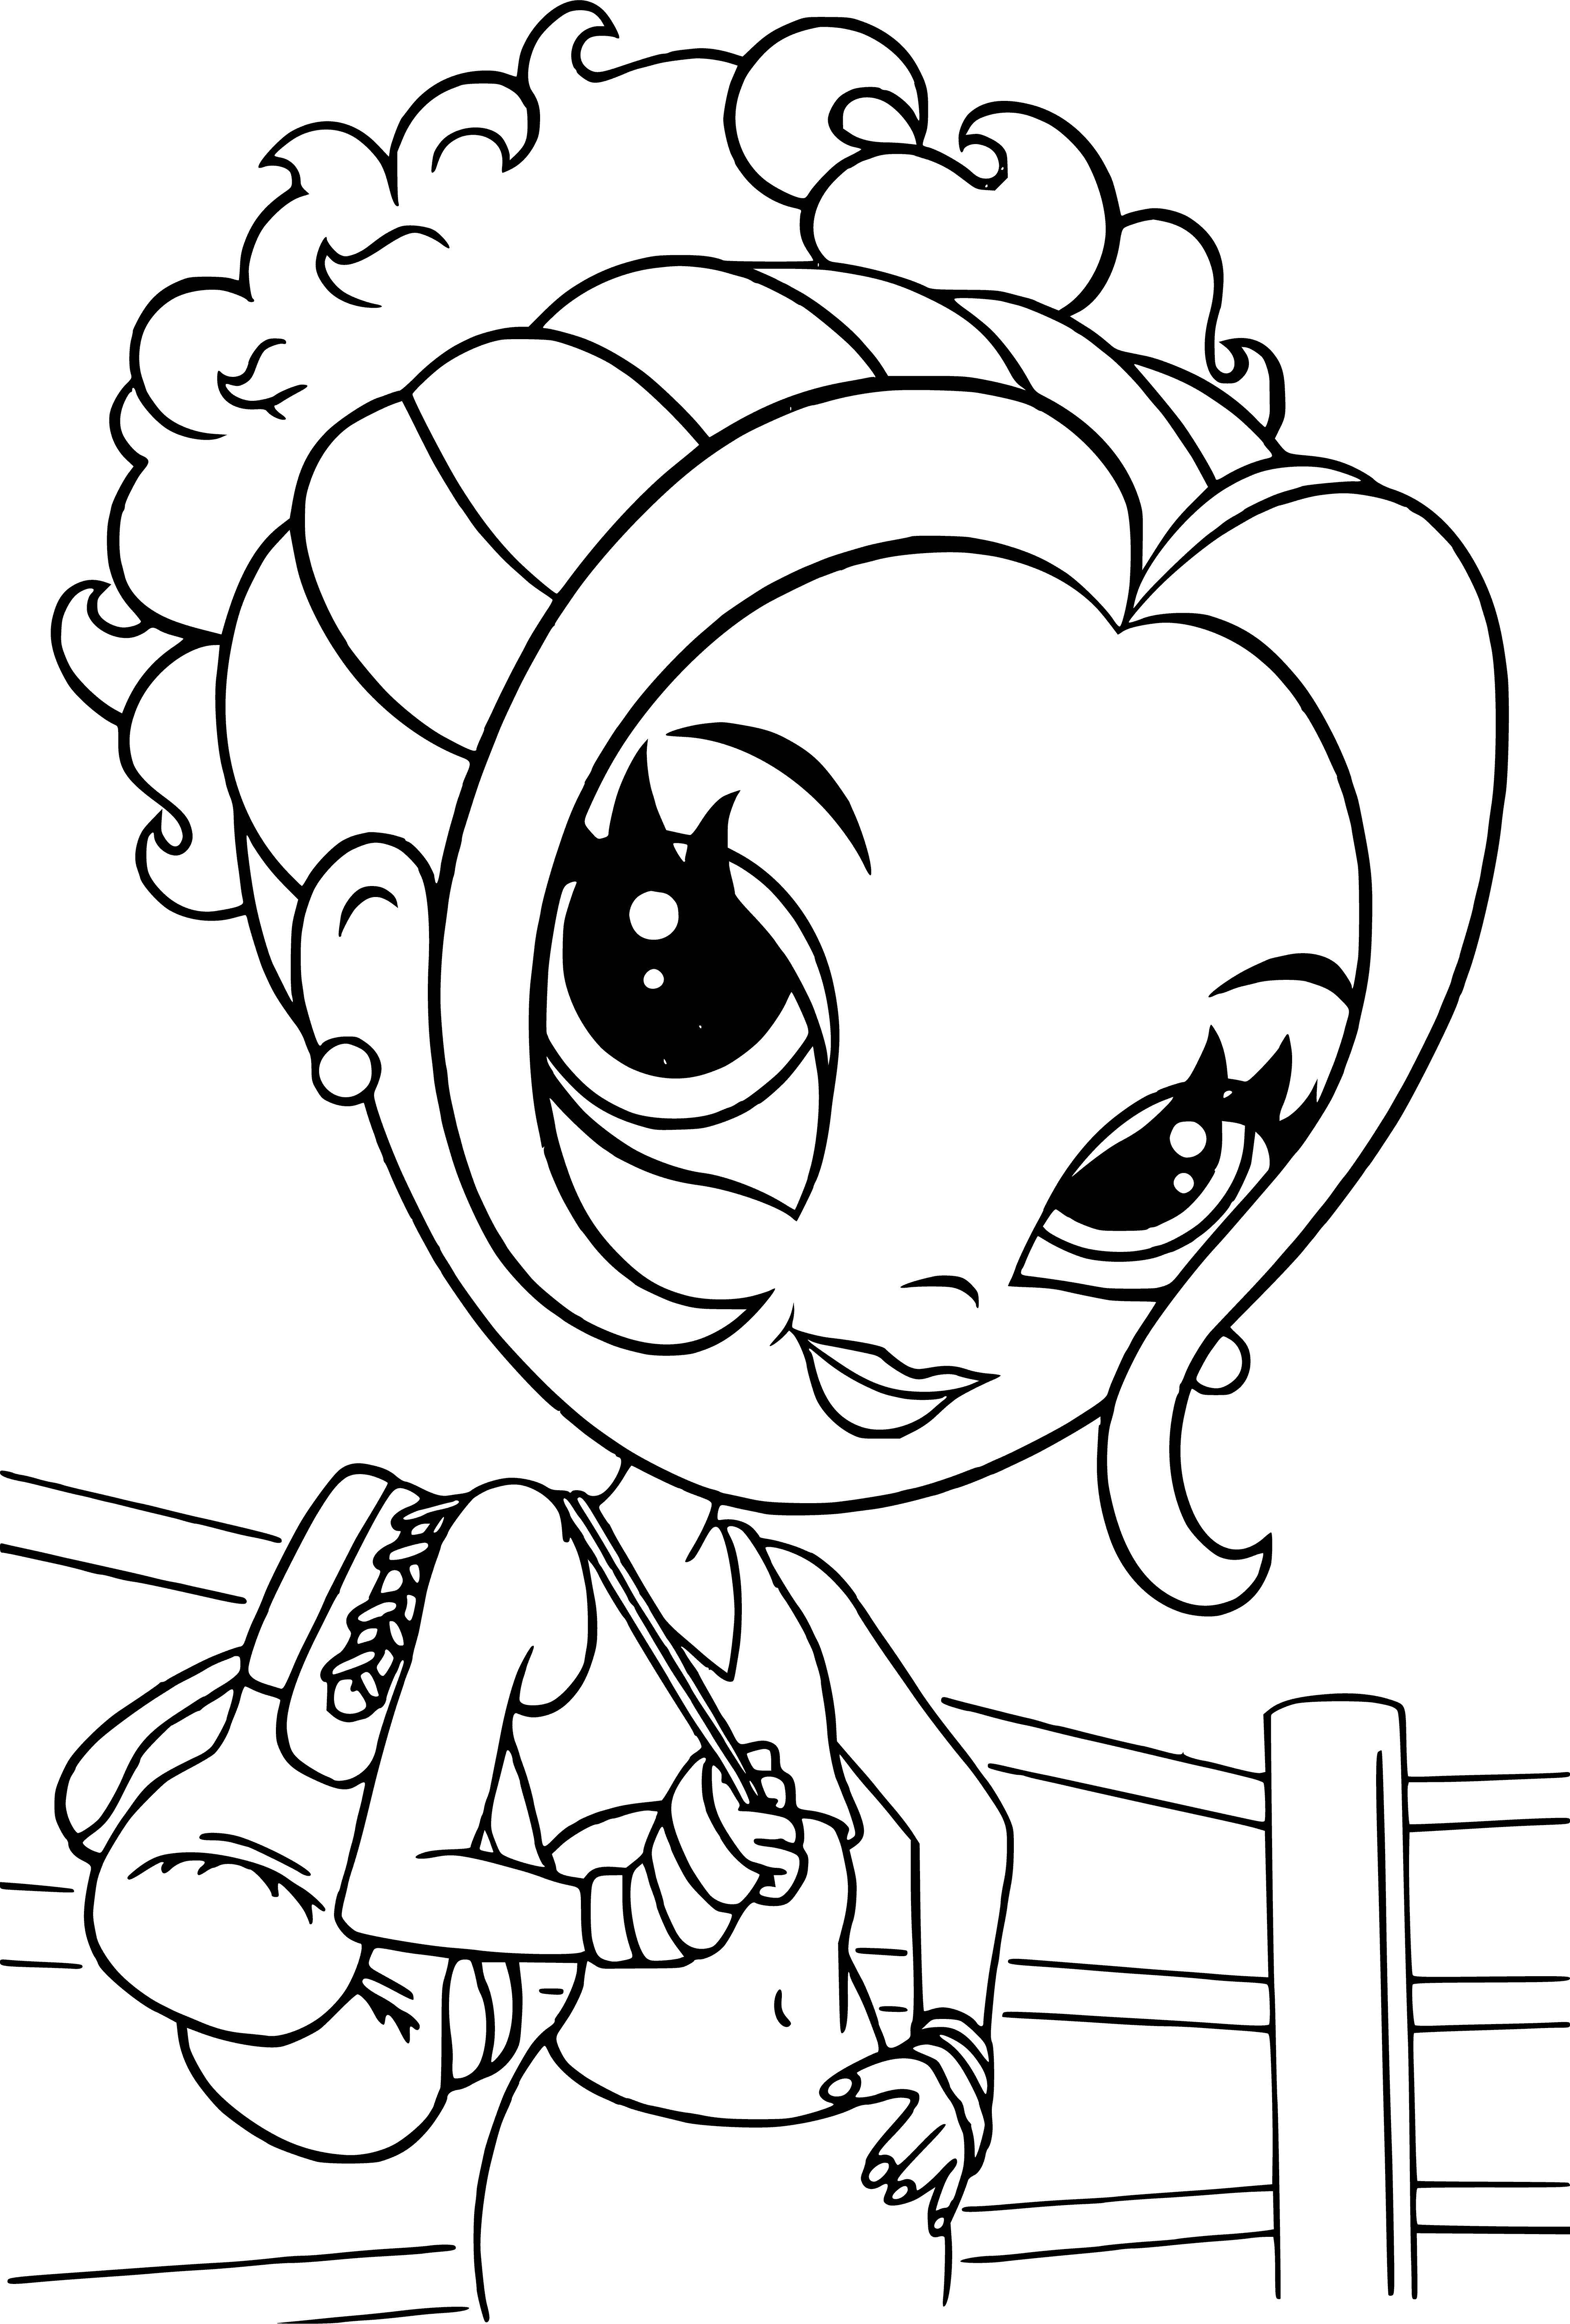 coloring page: Girl admires her outfit in the mirror: pink dress, scarf, purse & sunglasses.